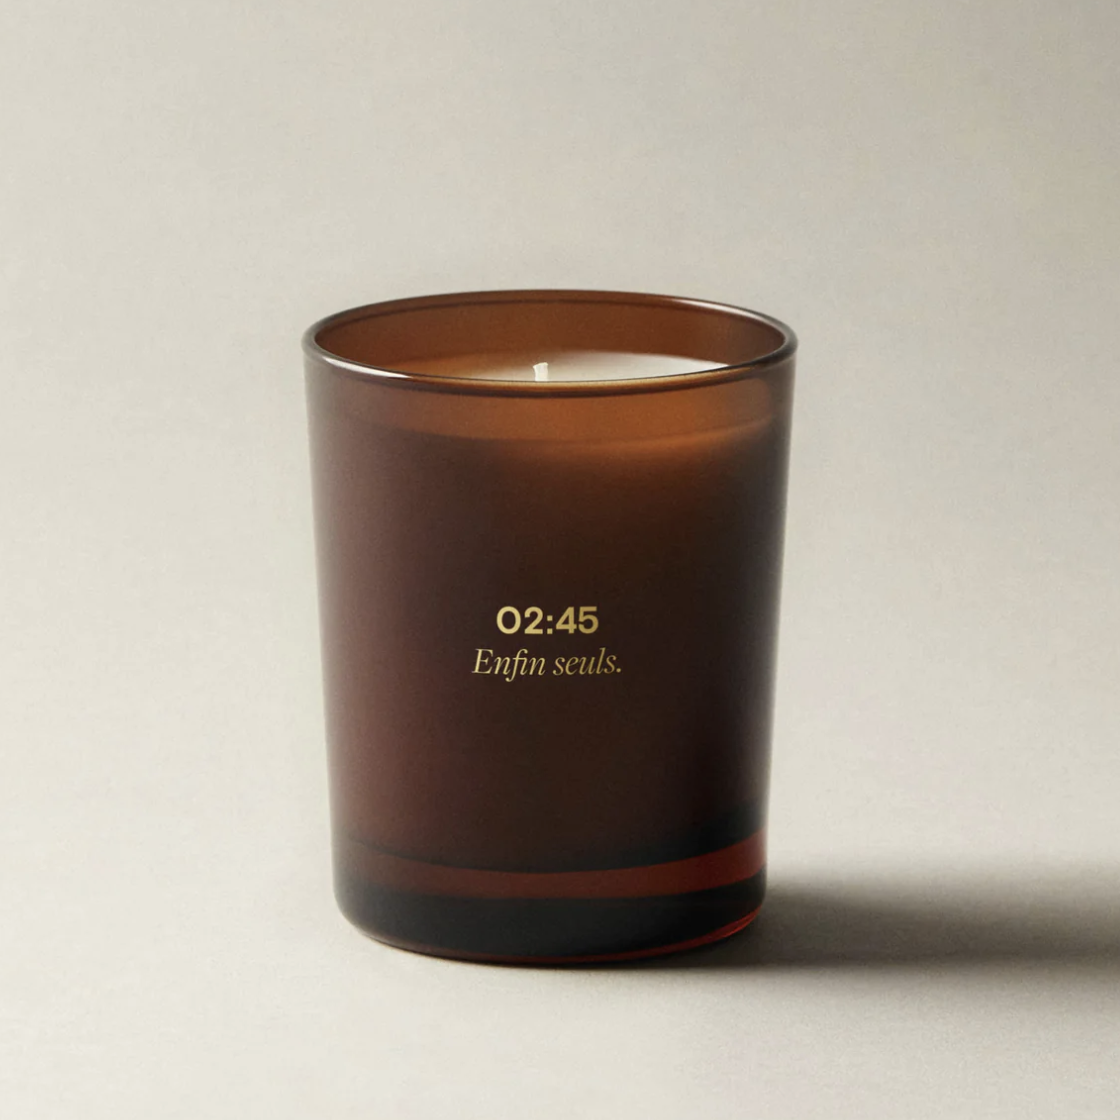 02:45 Enfin suels - Candle by D’ORSAY